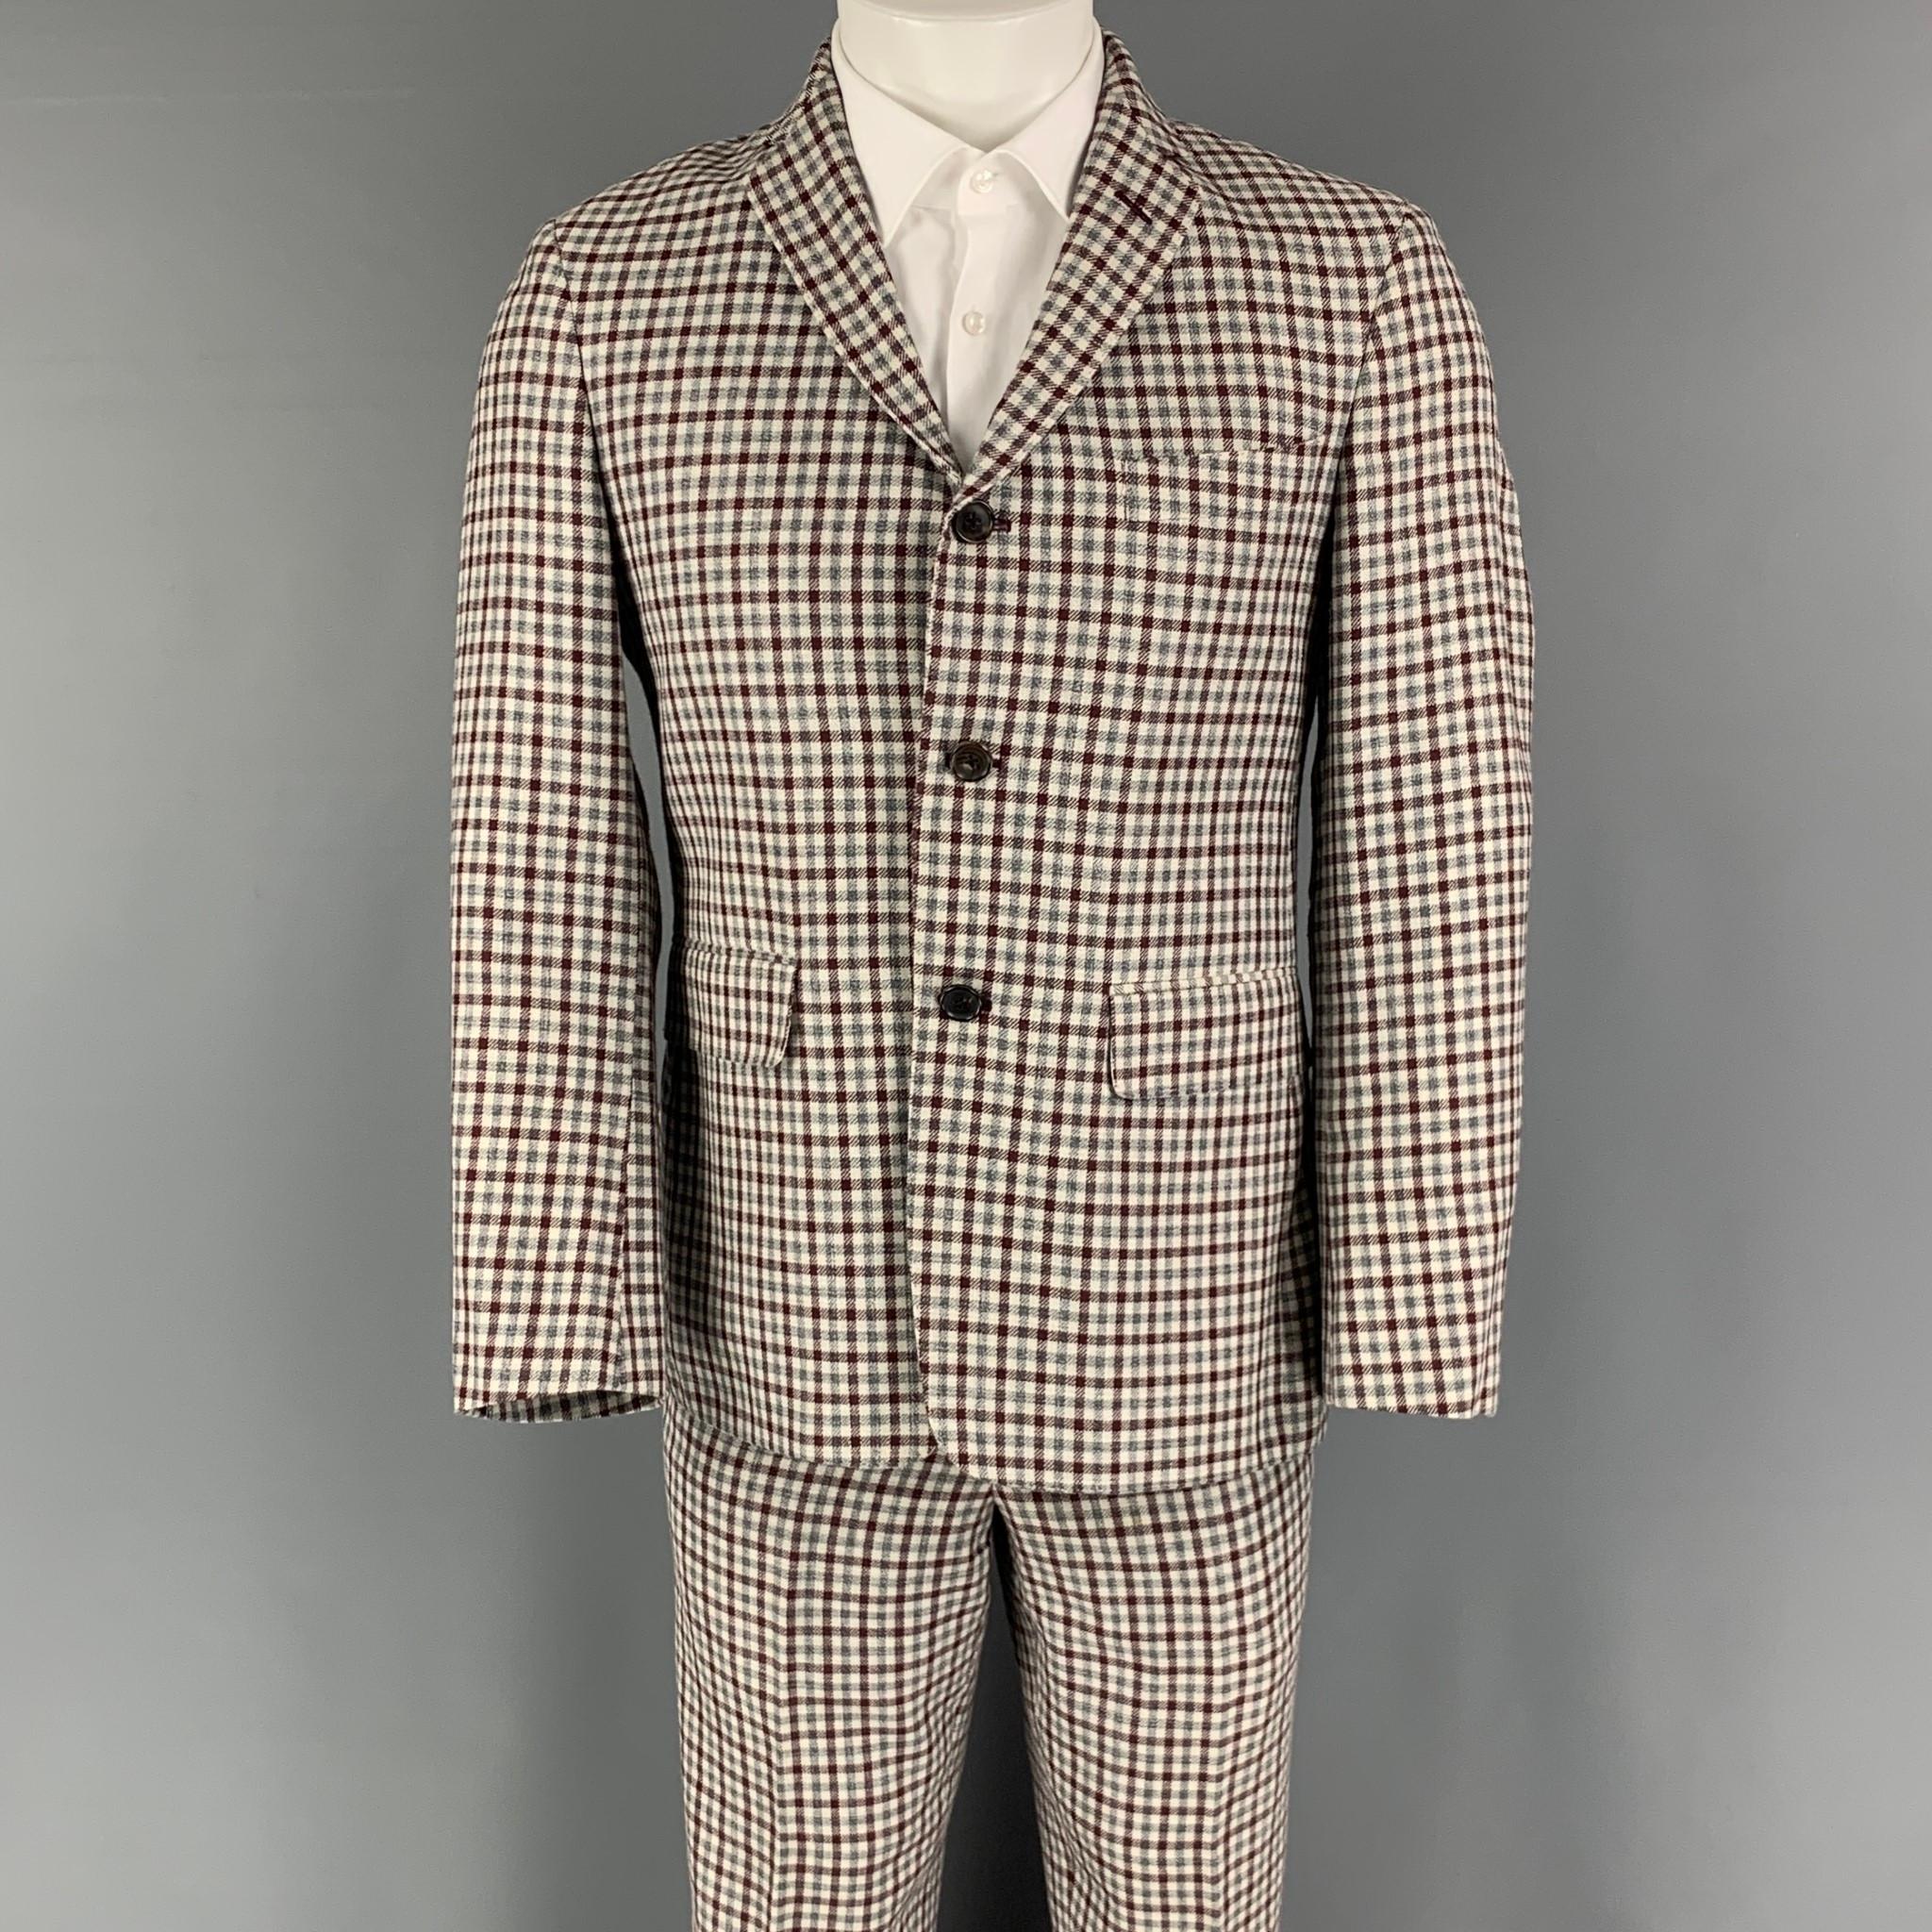 BLACK FLEECE suit comes in a burgundy, cream and grey checkered wool blend woven with a full liner and includes a single breasted, three button sport coat with a notch lapel and matching flat front trousers. Made in USA.

Very Good Pre-Owned